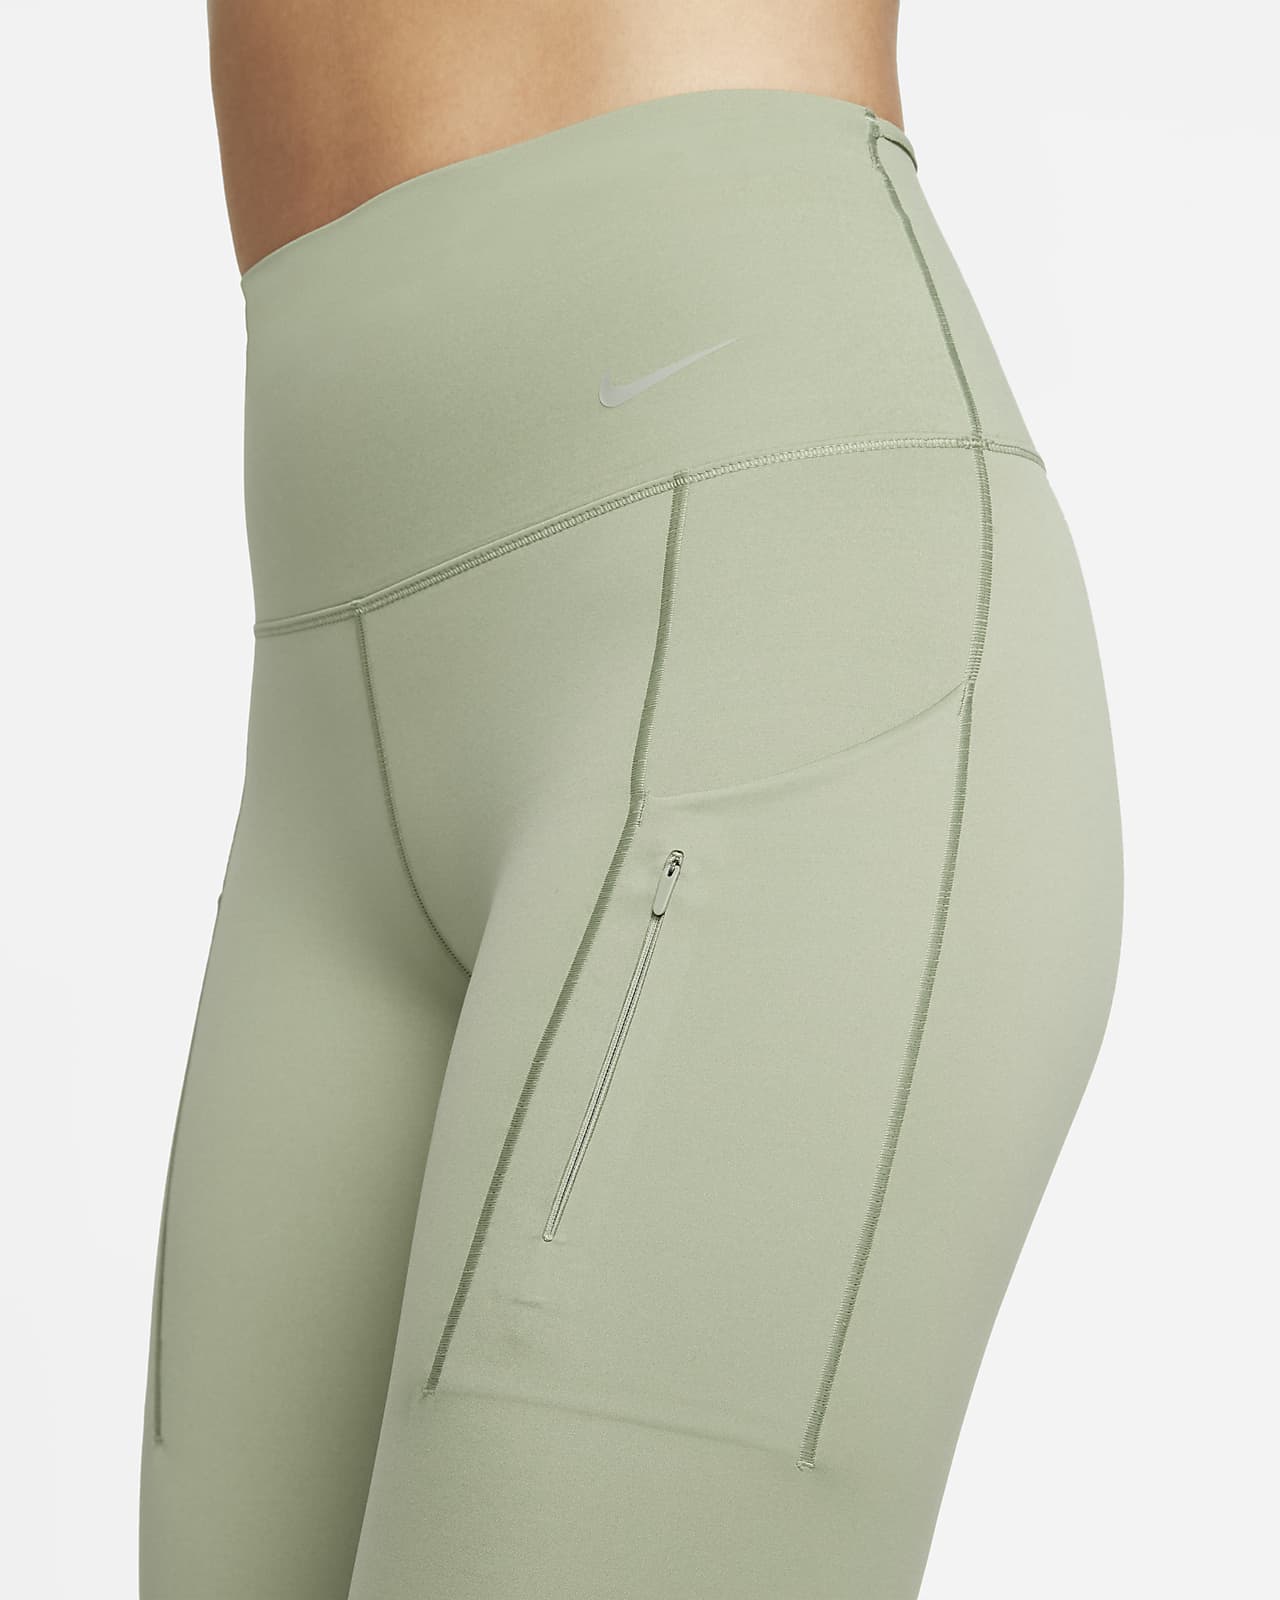 Get Going Sage Green 7/8 Leggings – Shop the Mint